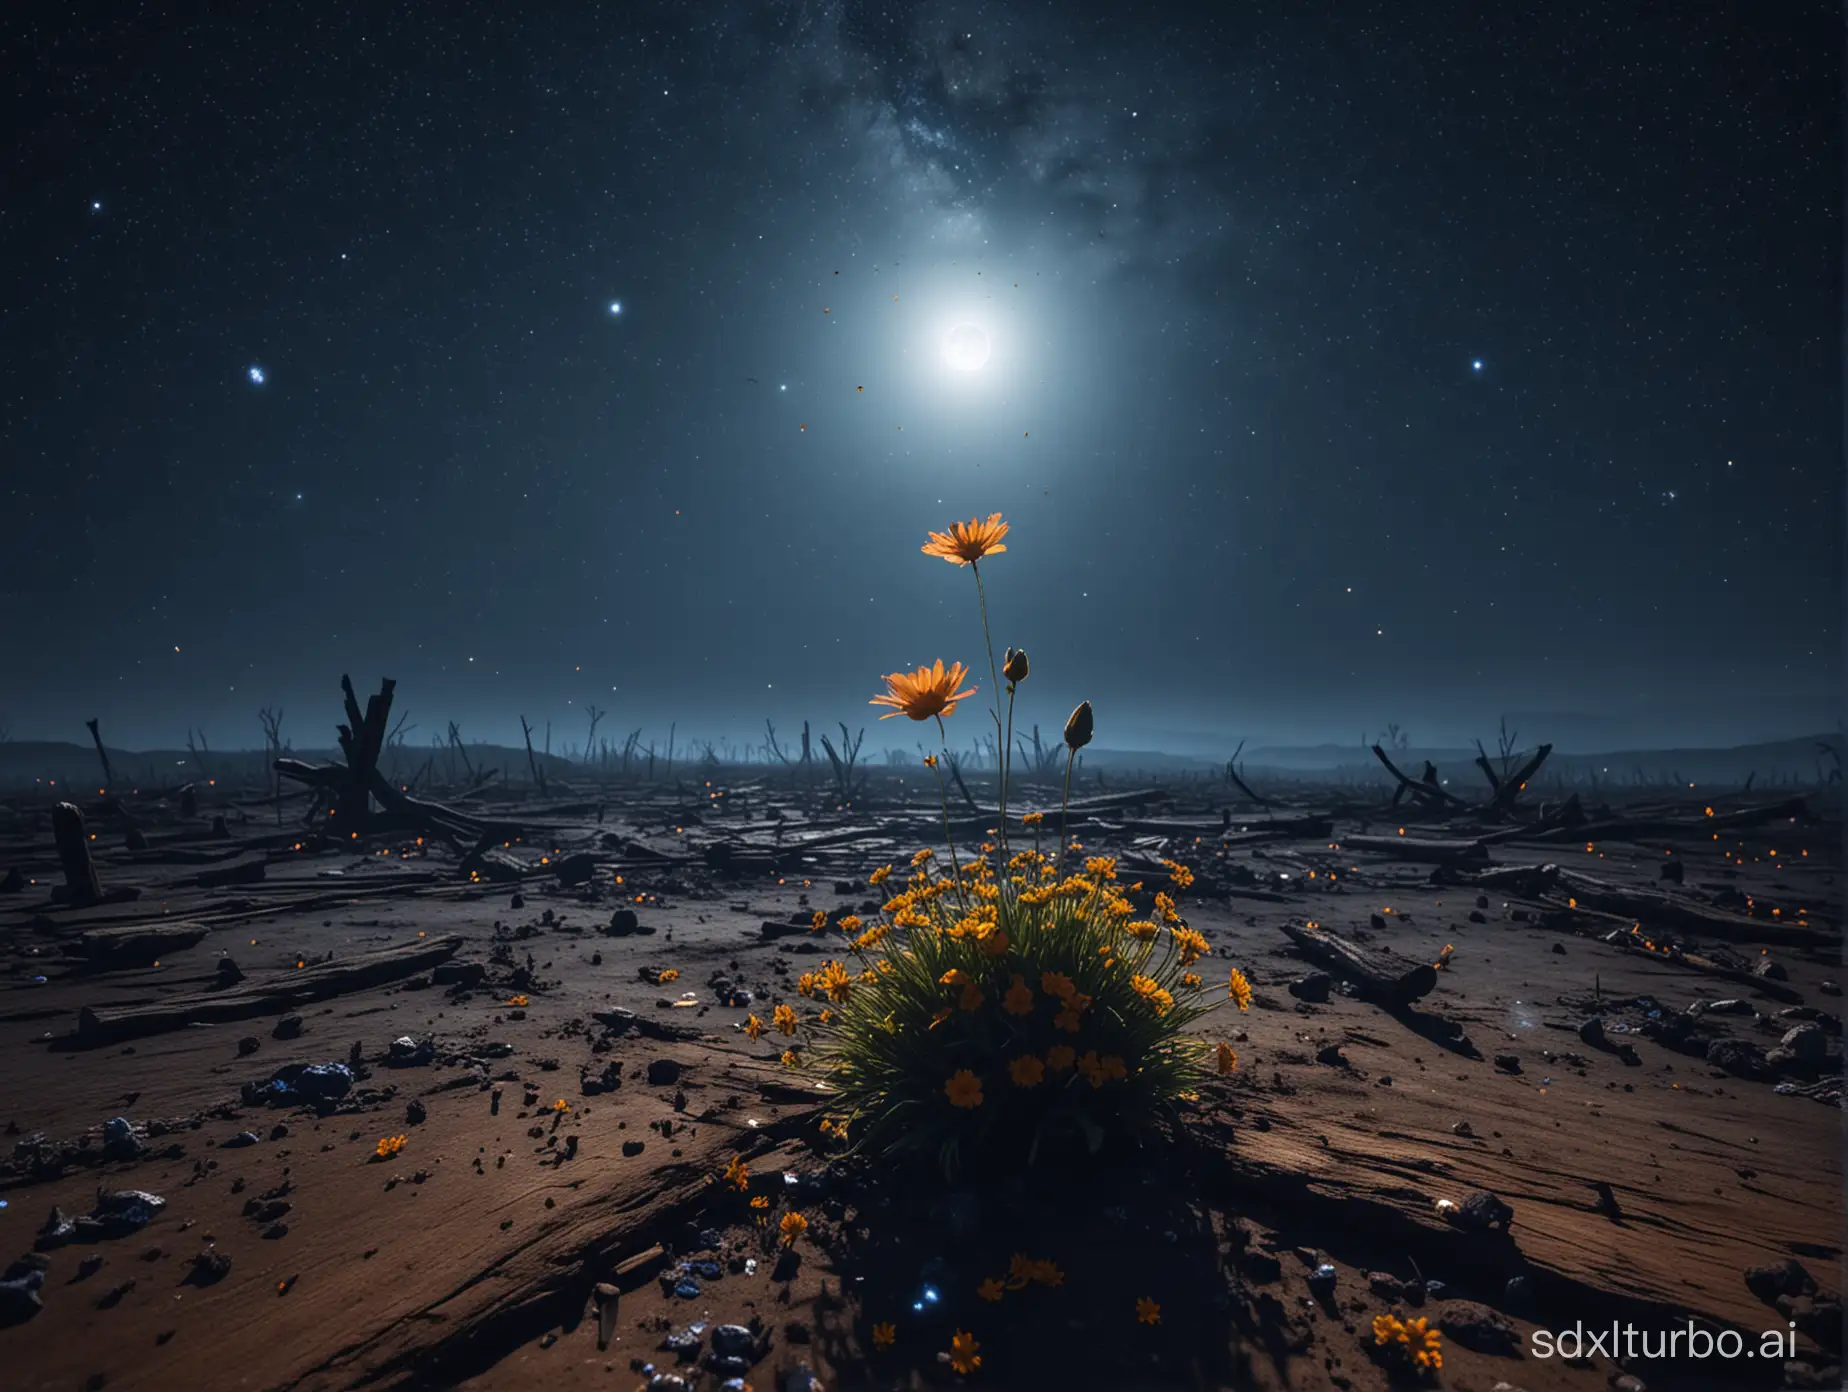 The battlefield just finished fighting, a flower floating in the air, there are quite a few flowers on the ground, burned wood, fire, night, deep blue sky, countless stars, moon.